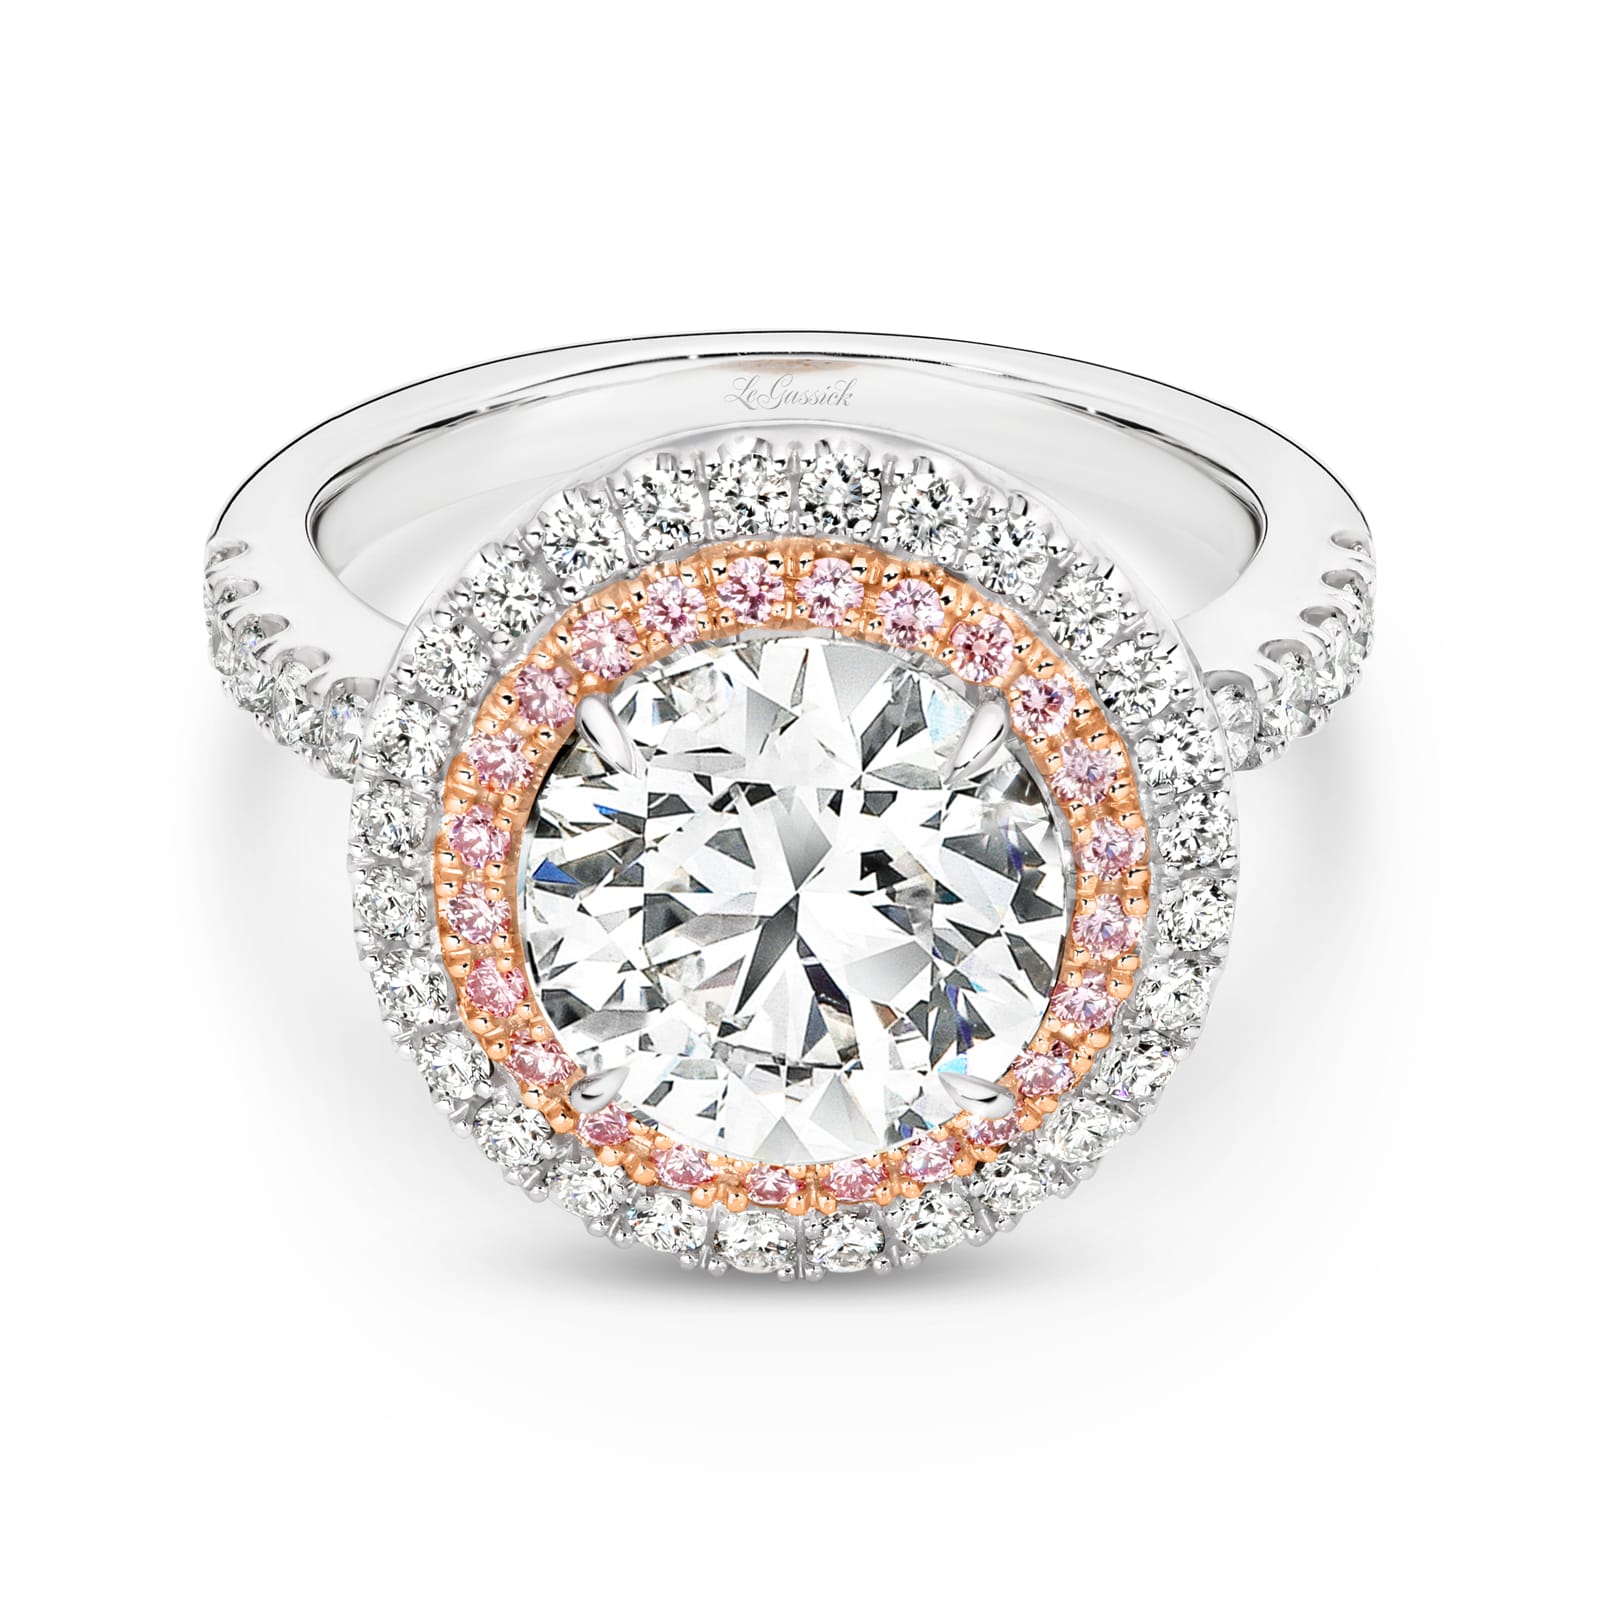 Cleopatra 4.51ct Round Brilliant Cut Diamond Ring part of the Beyond Luxury Collection by LeGassick.